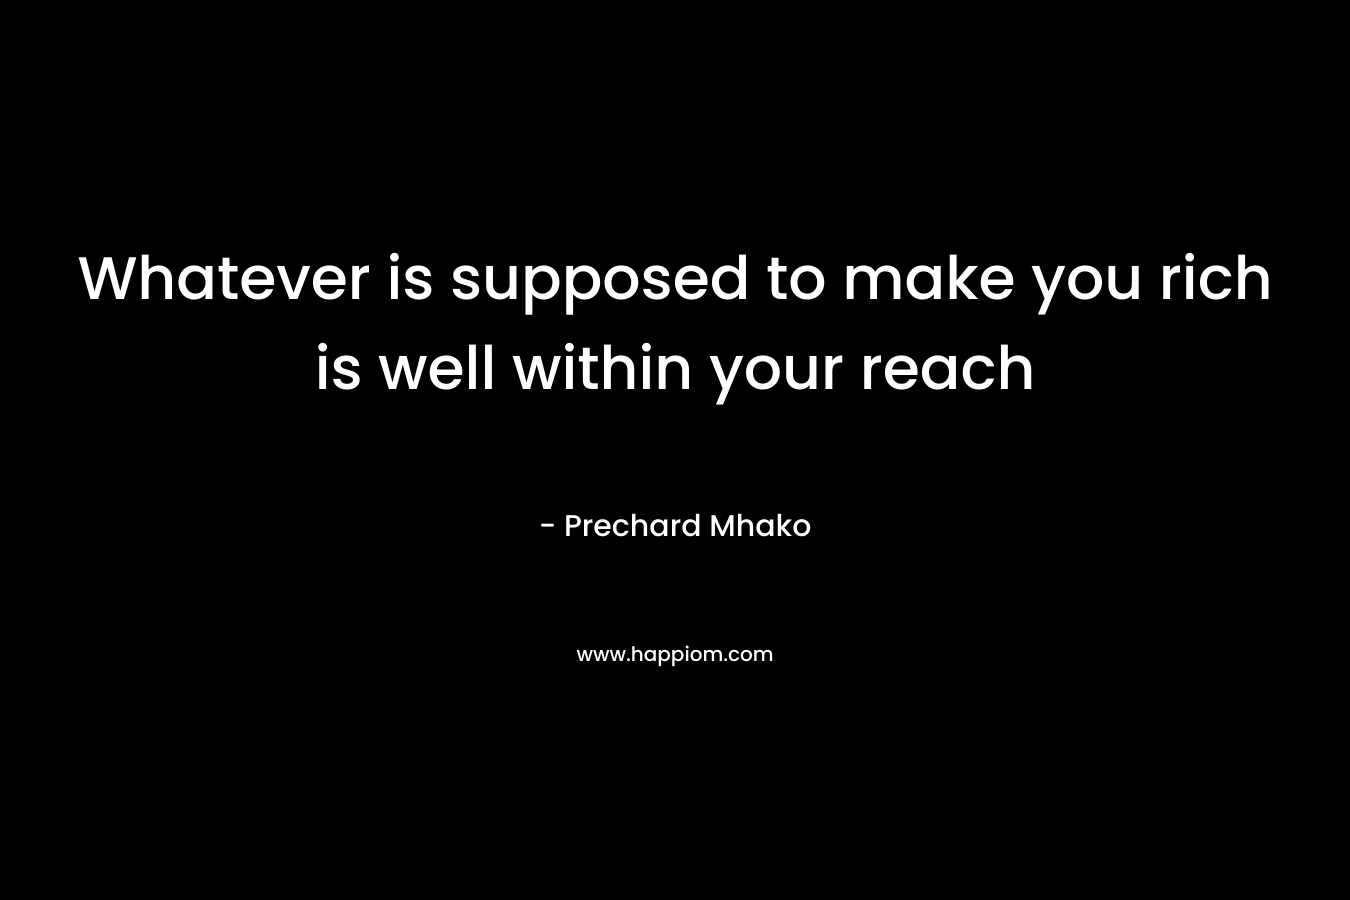 Whatever is supposed to make you rich is well within your reach – Prechard Mhako